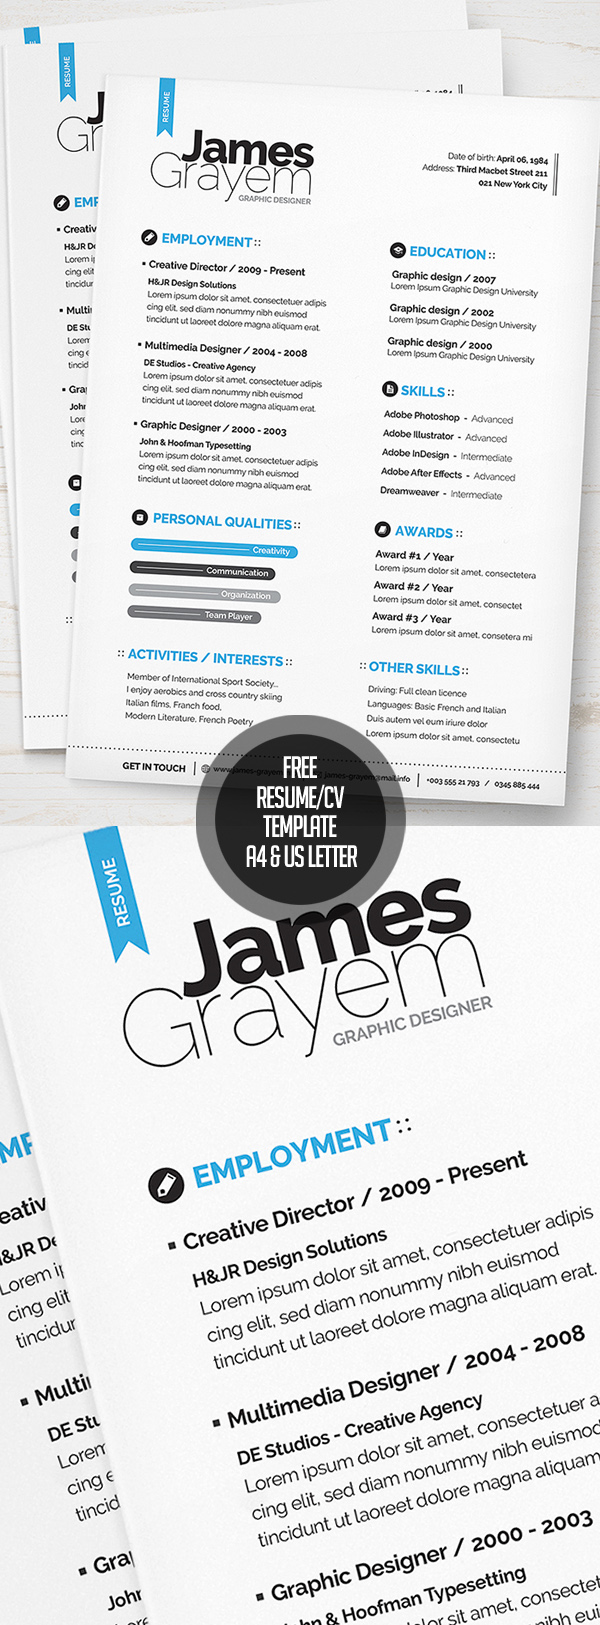 Free Resume / CV Template (A4 & US letter) PSD